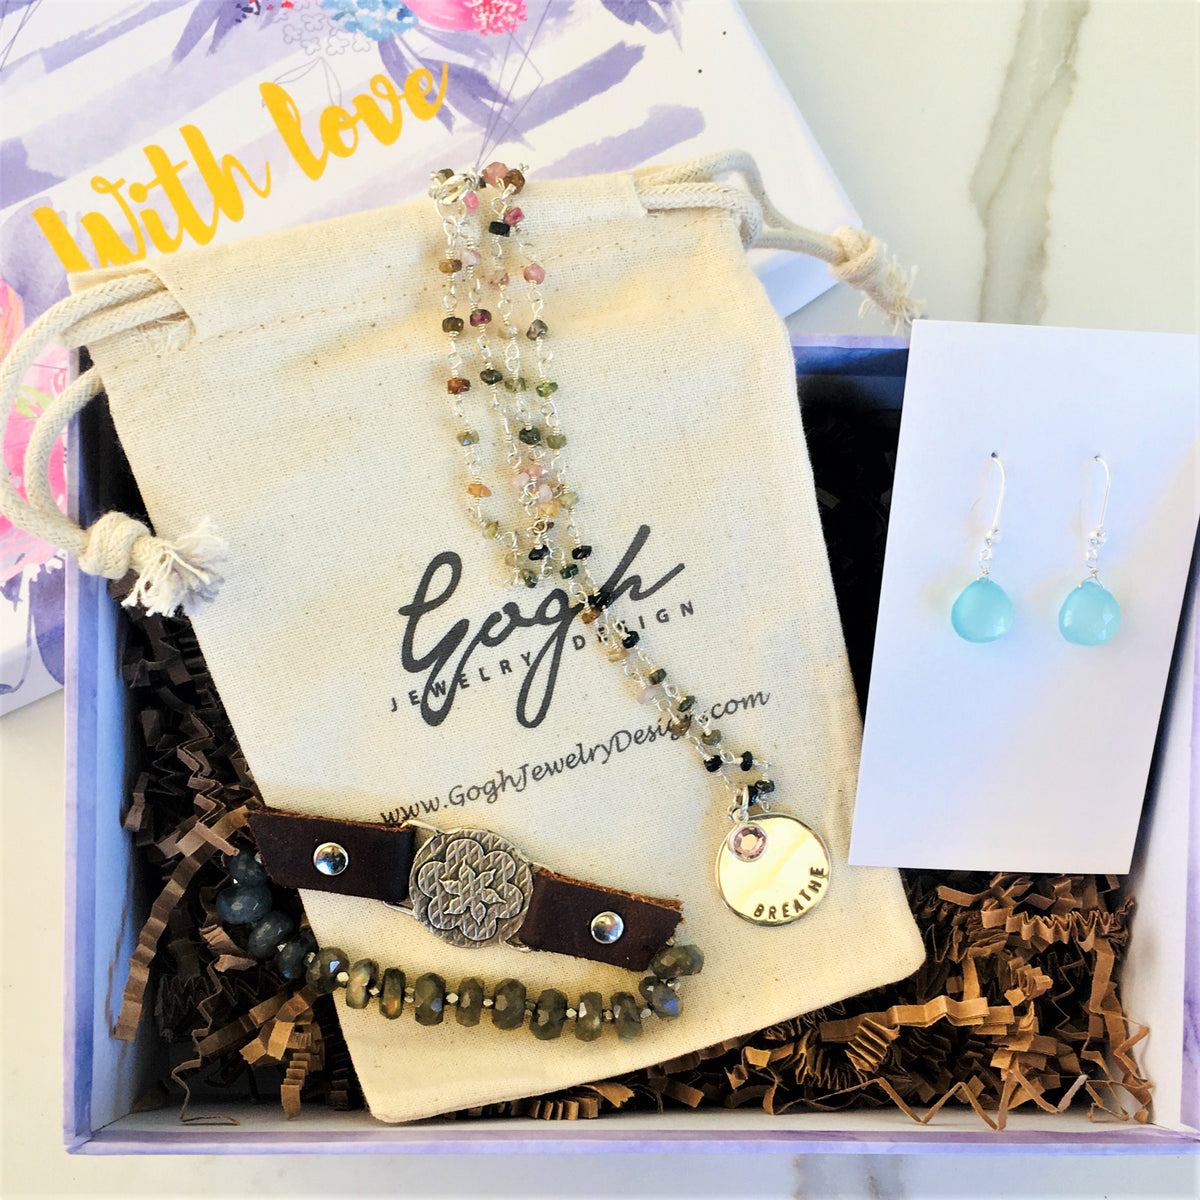 Inspirational Gift Set: BREATHE Tourmaline Necklace, Visualization Bracelet and Aquamarine Earrings Trio in a READY TO GIFT Box. $237 Value